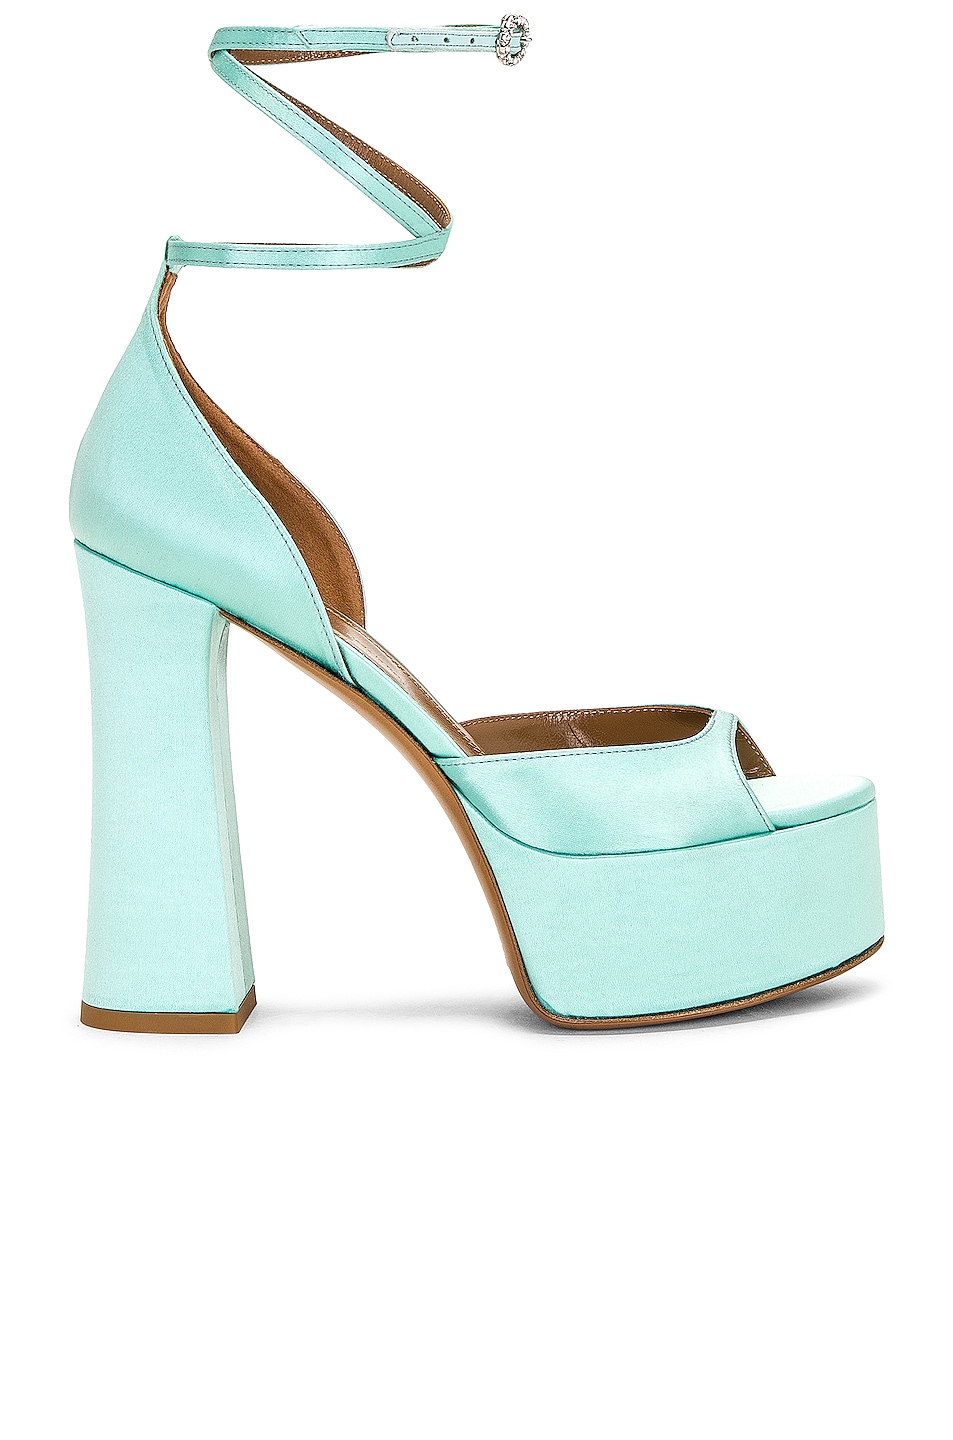 Dolce Heel in Teal